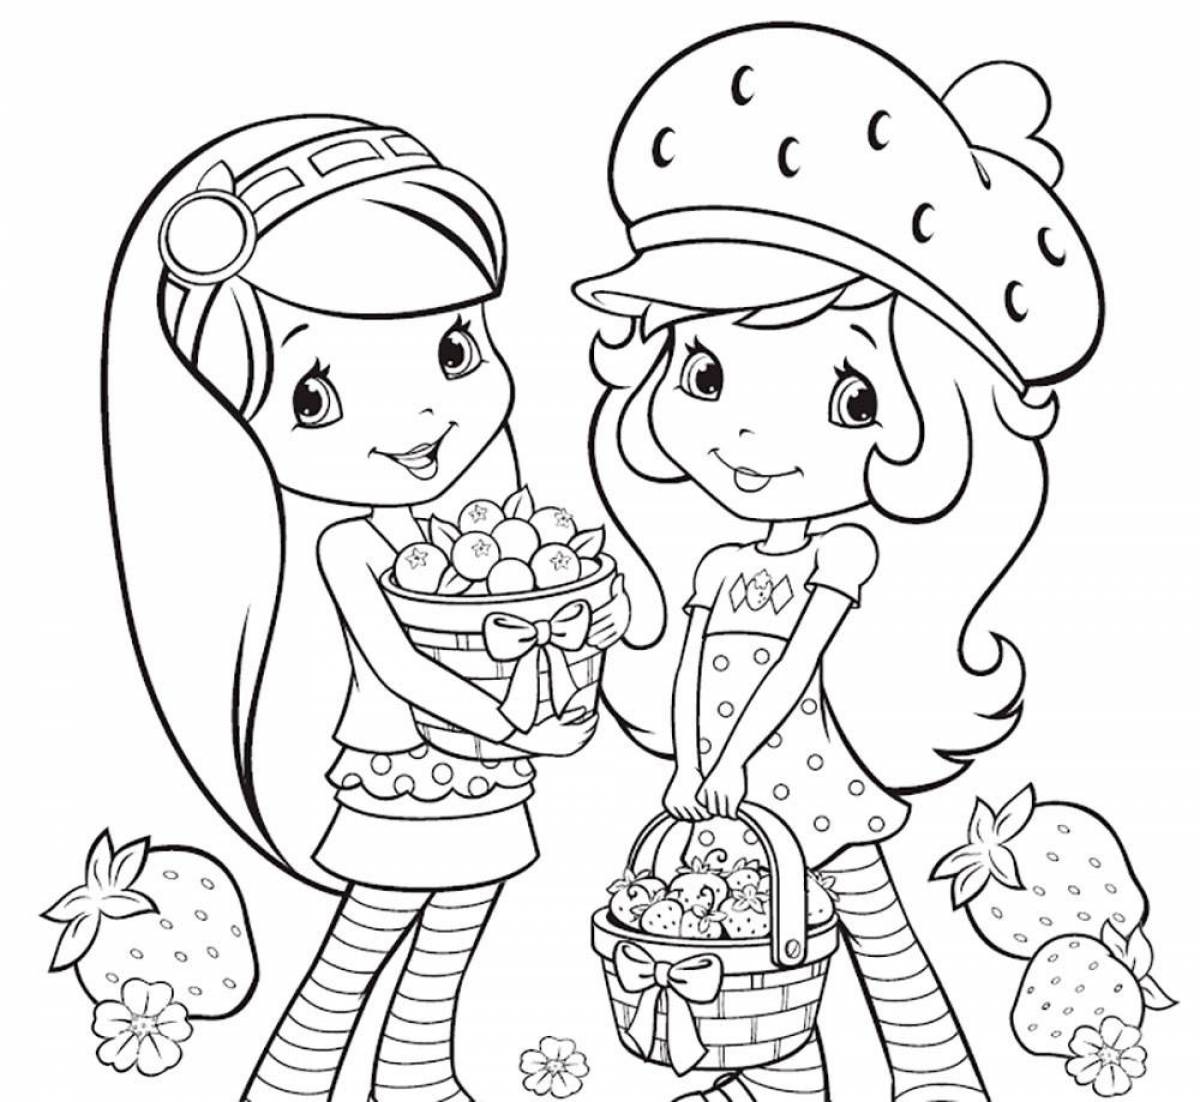 Playful girly coloring book